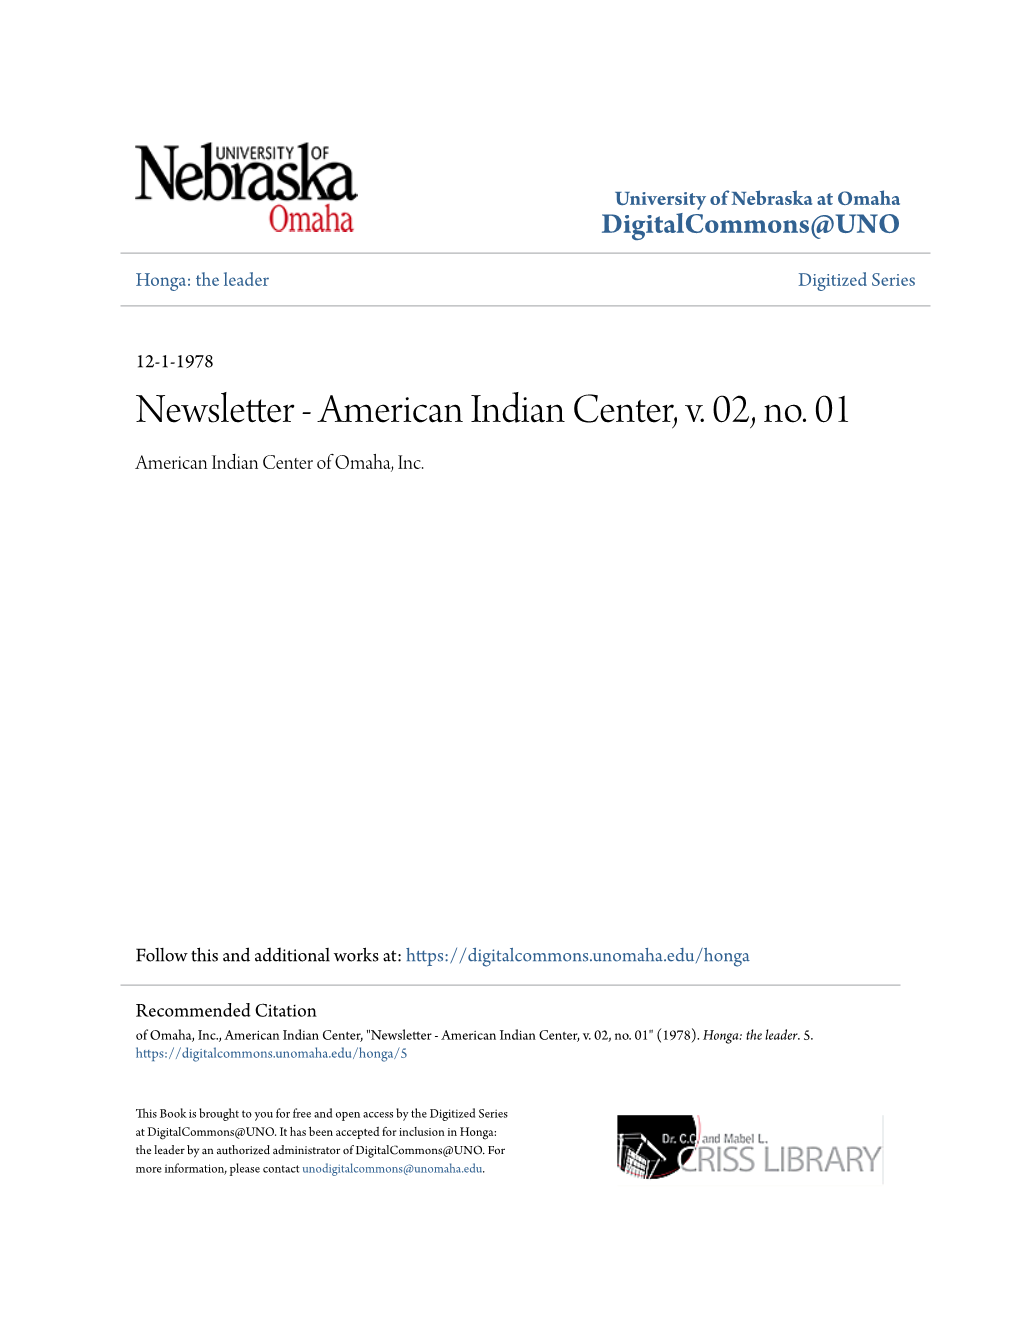 American Indian Center, V. 02, No. 01 American Indian Center of Omaha, Inc